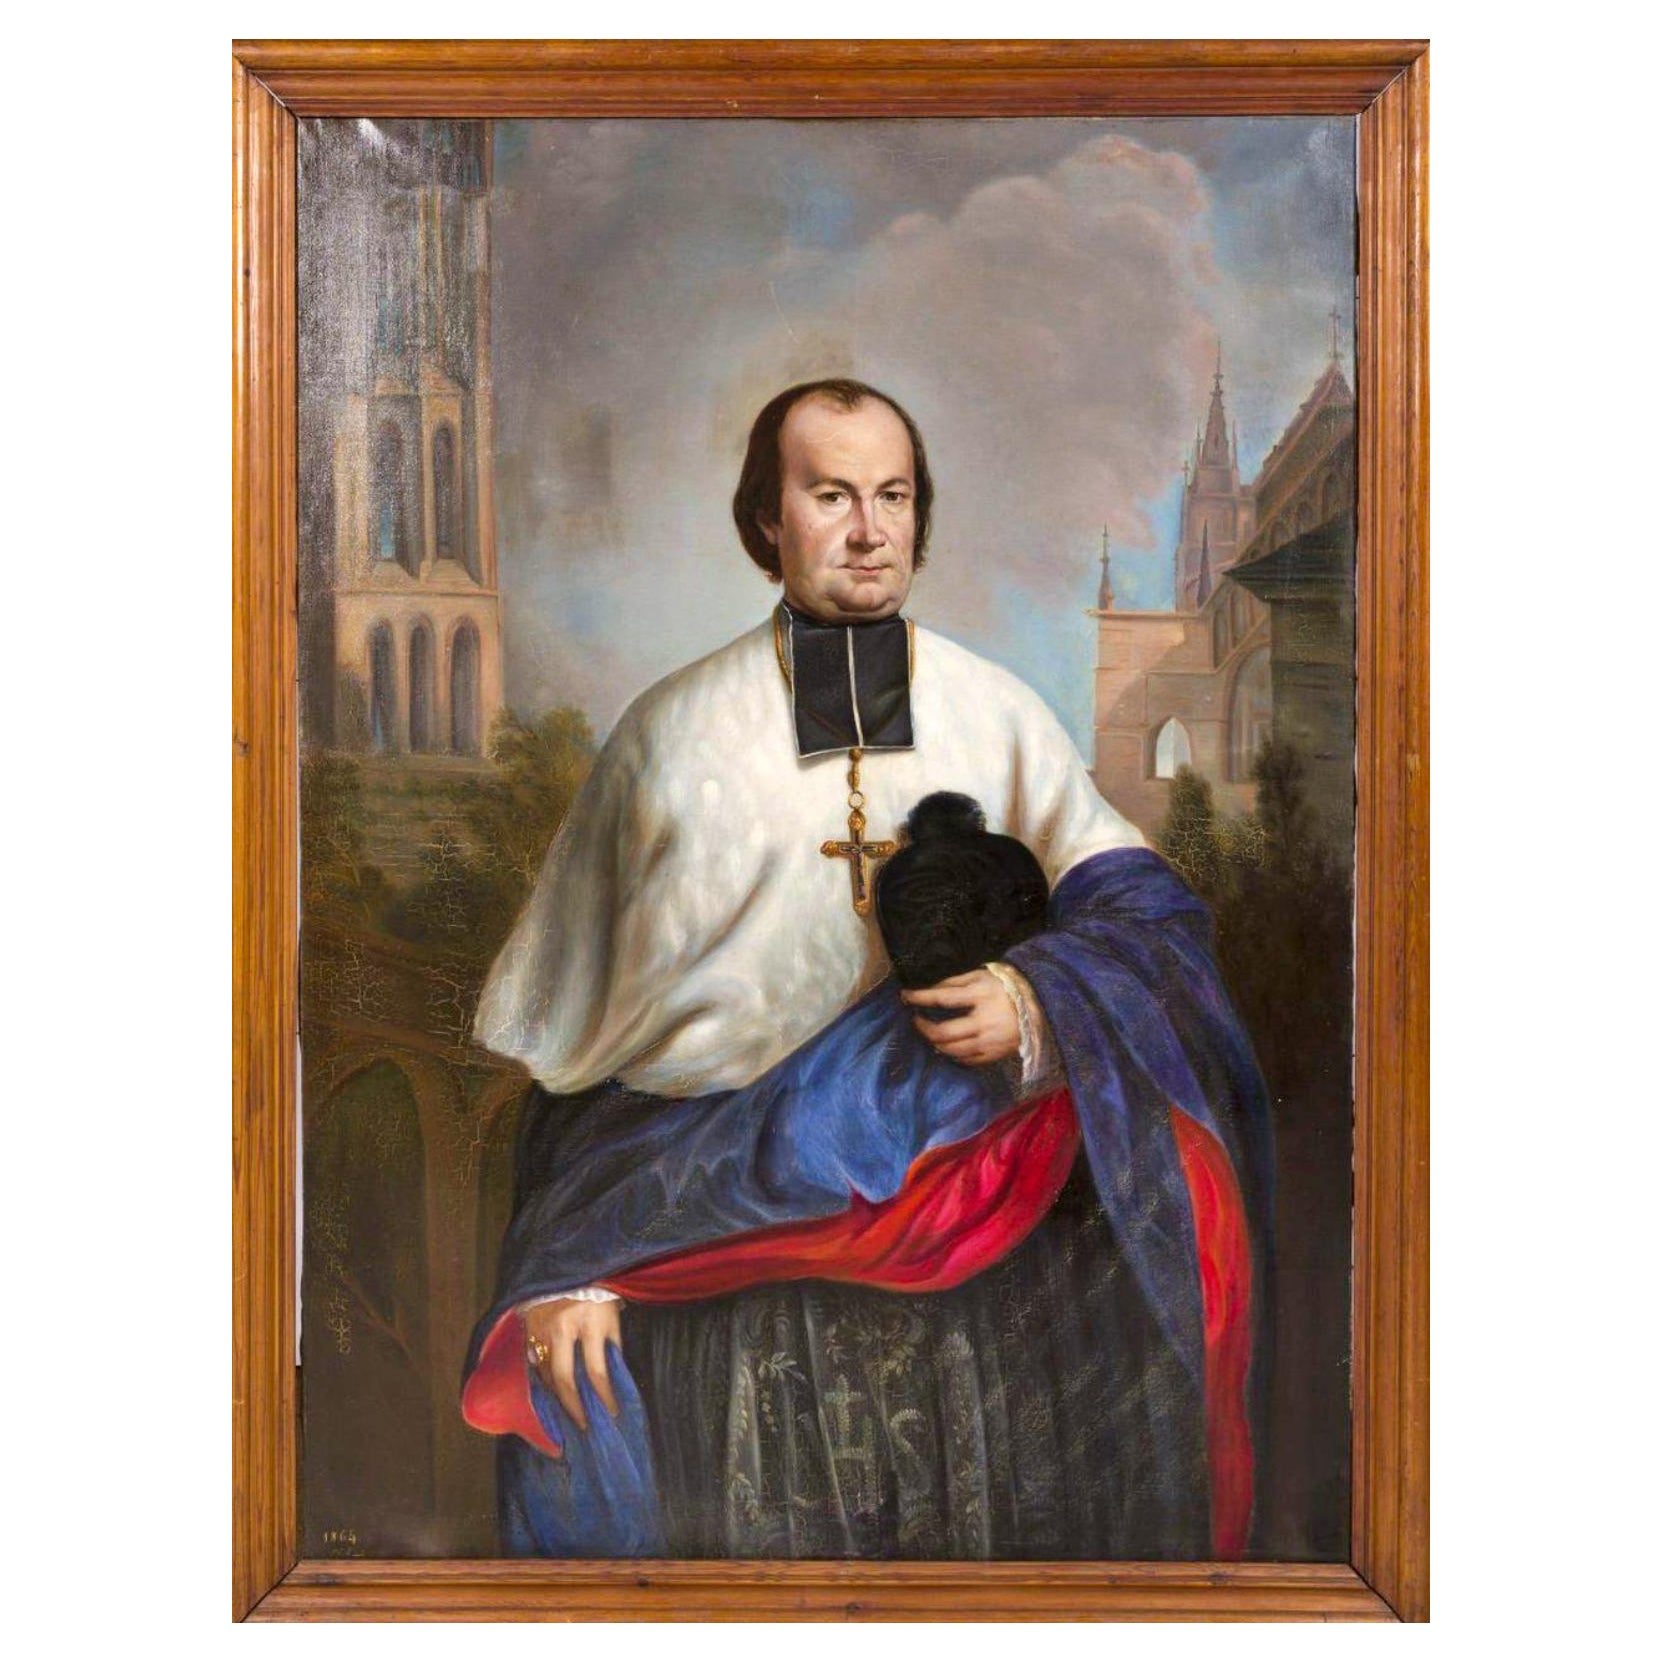 German School, 19th Century Portrait of a Church Official / Prelate Dated 1864